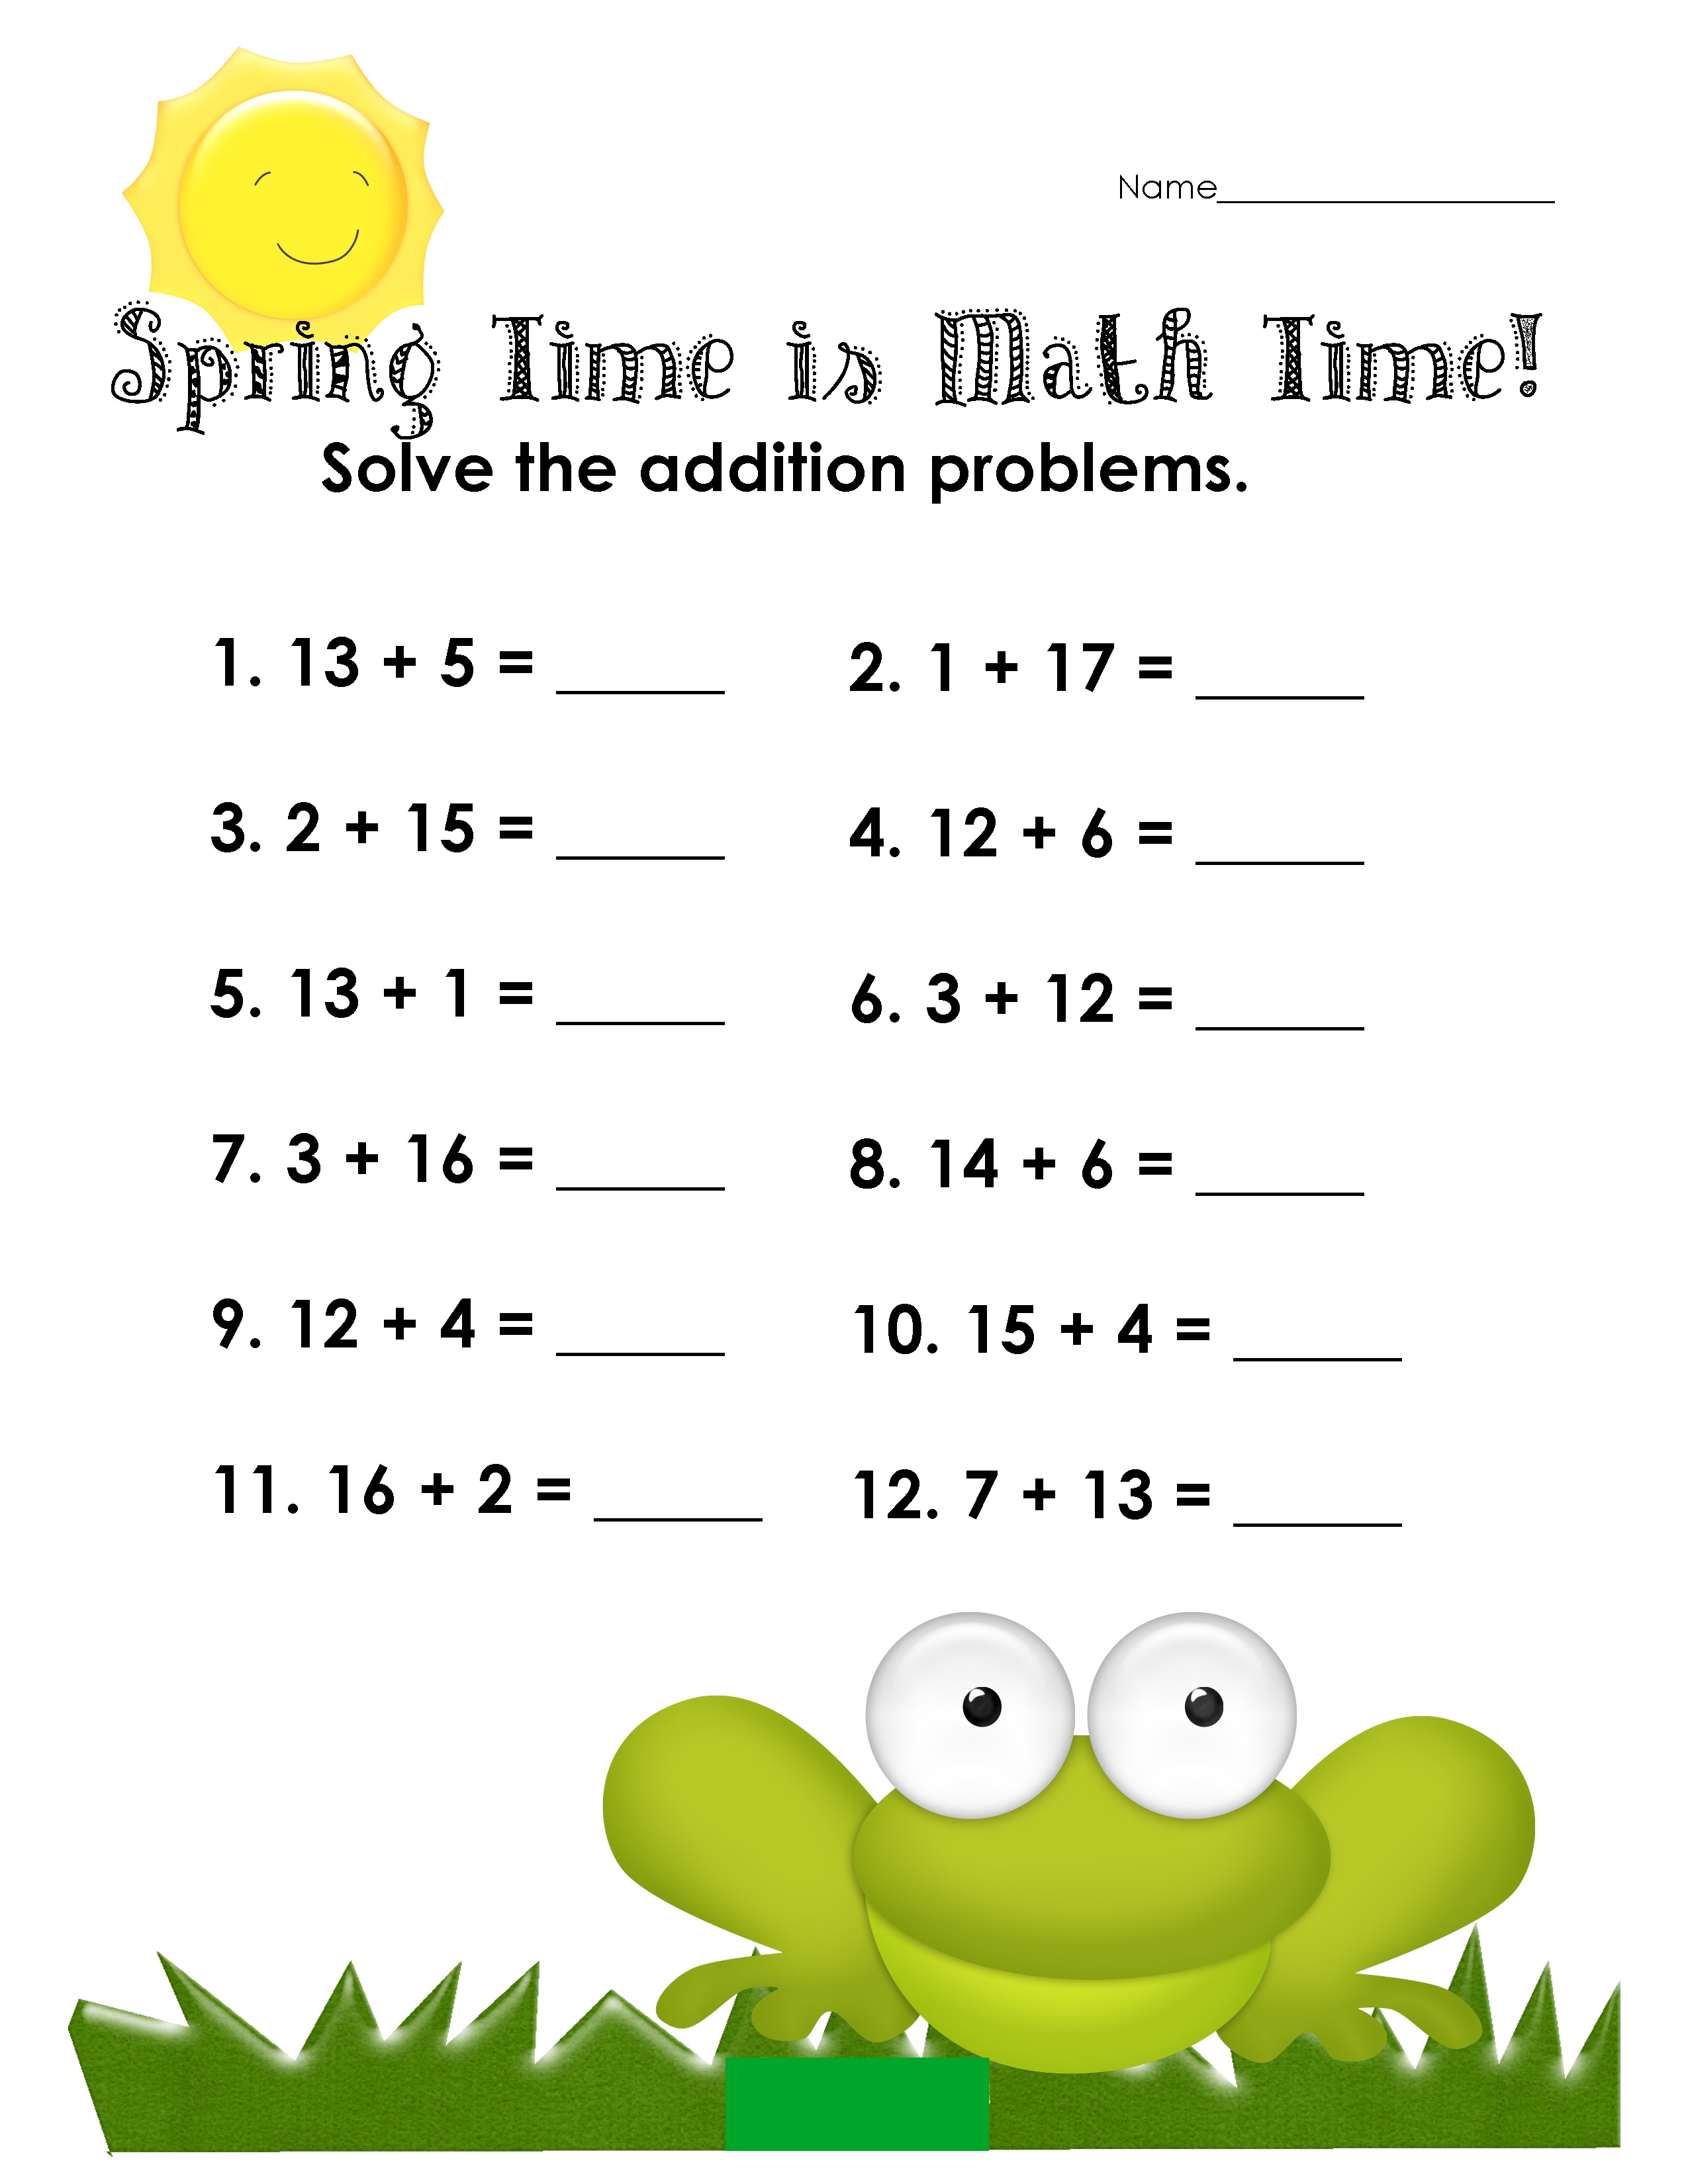 fun sheets for math for kids